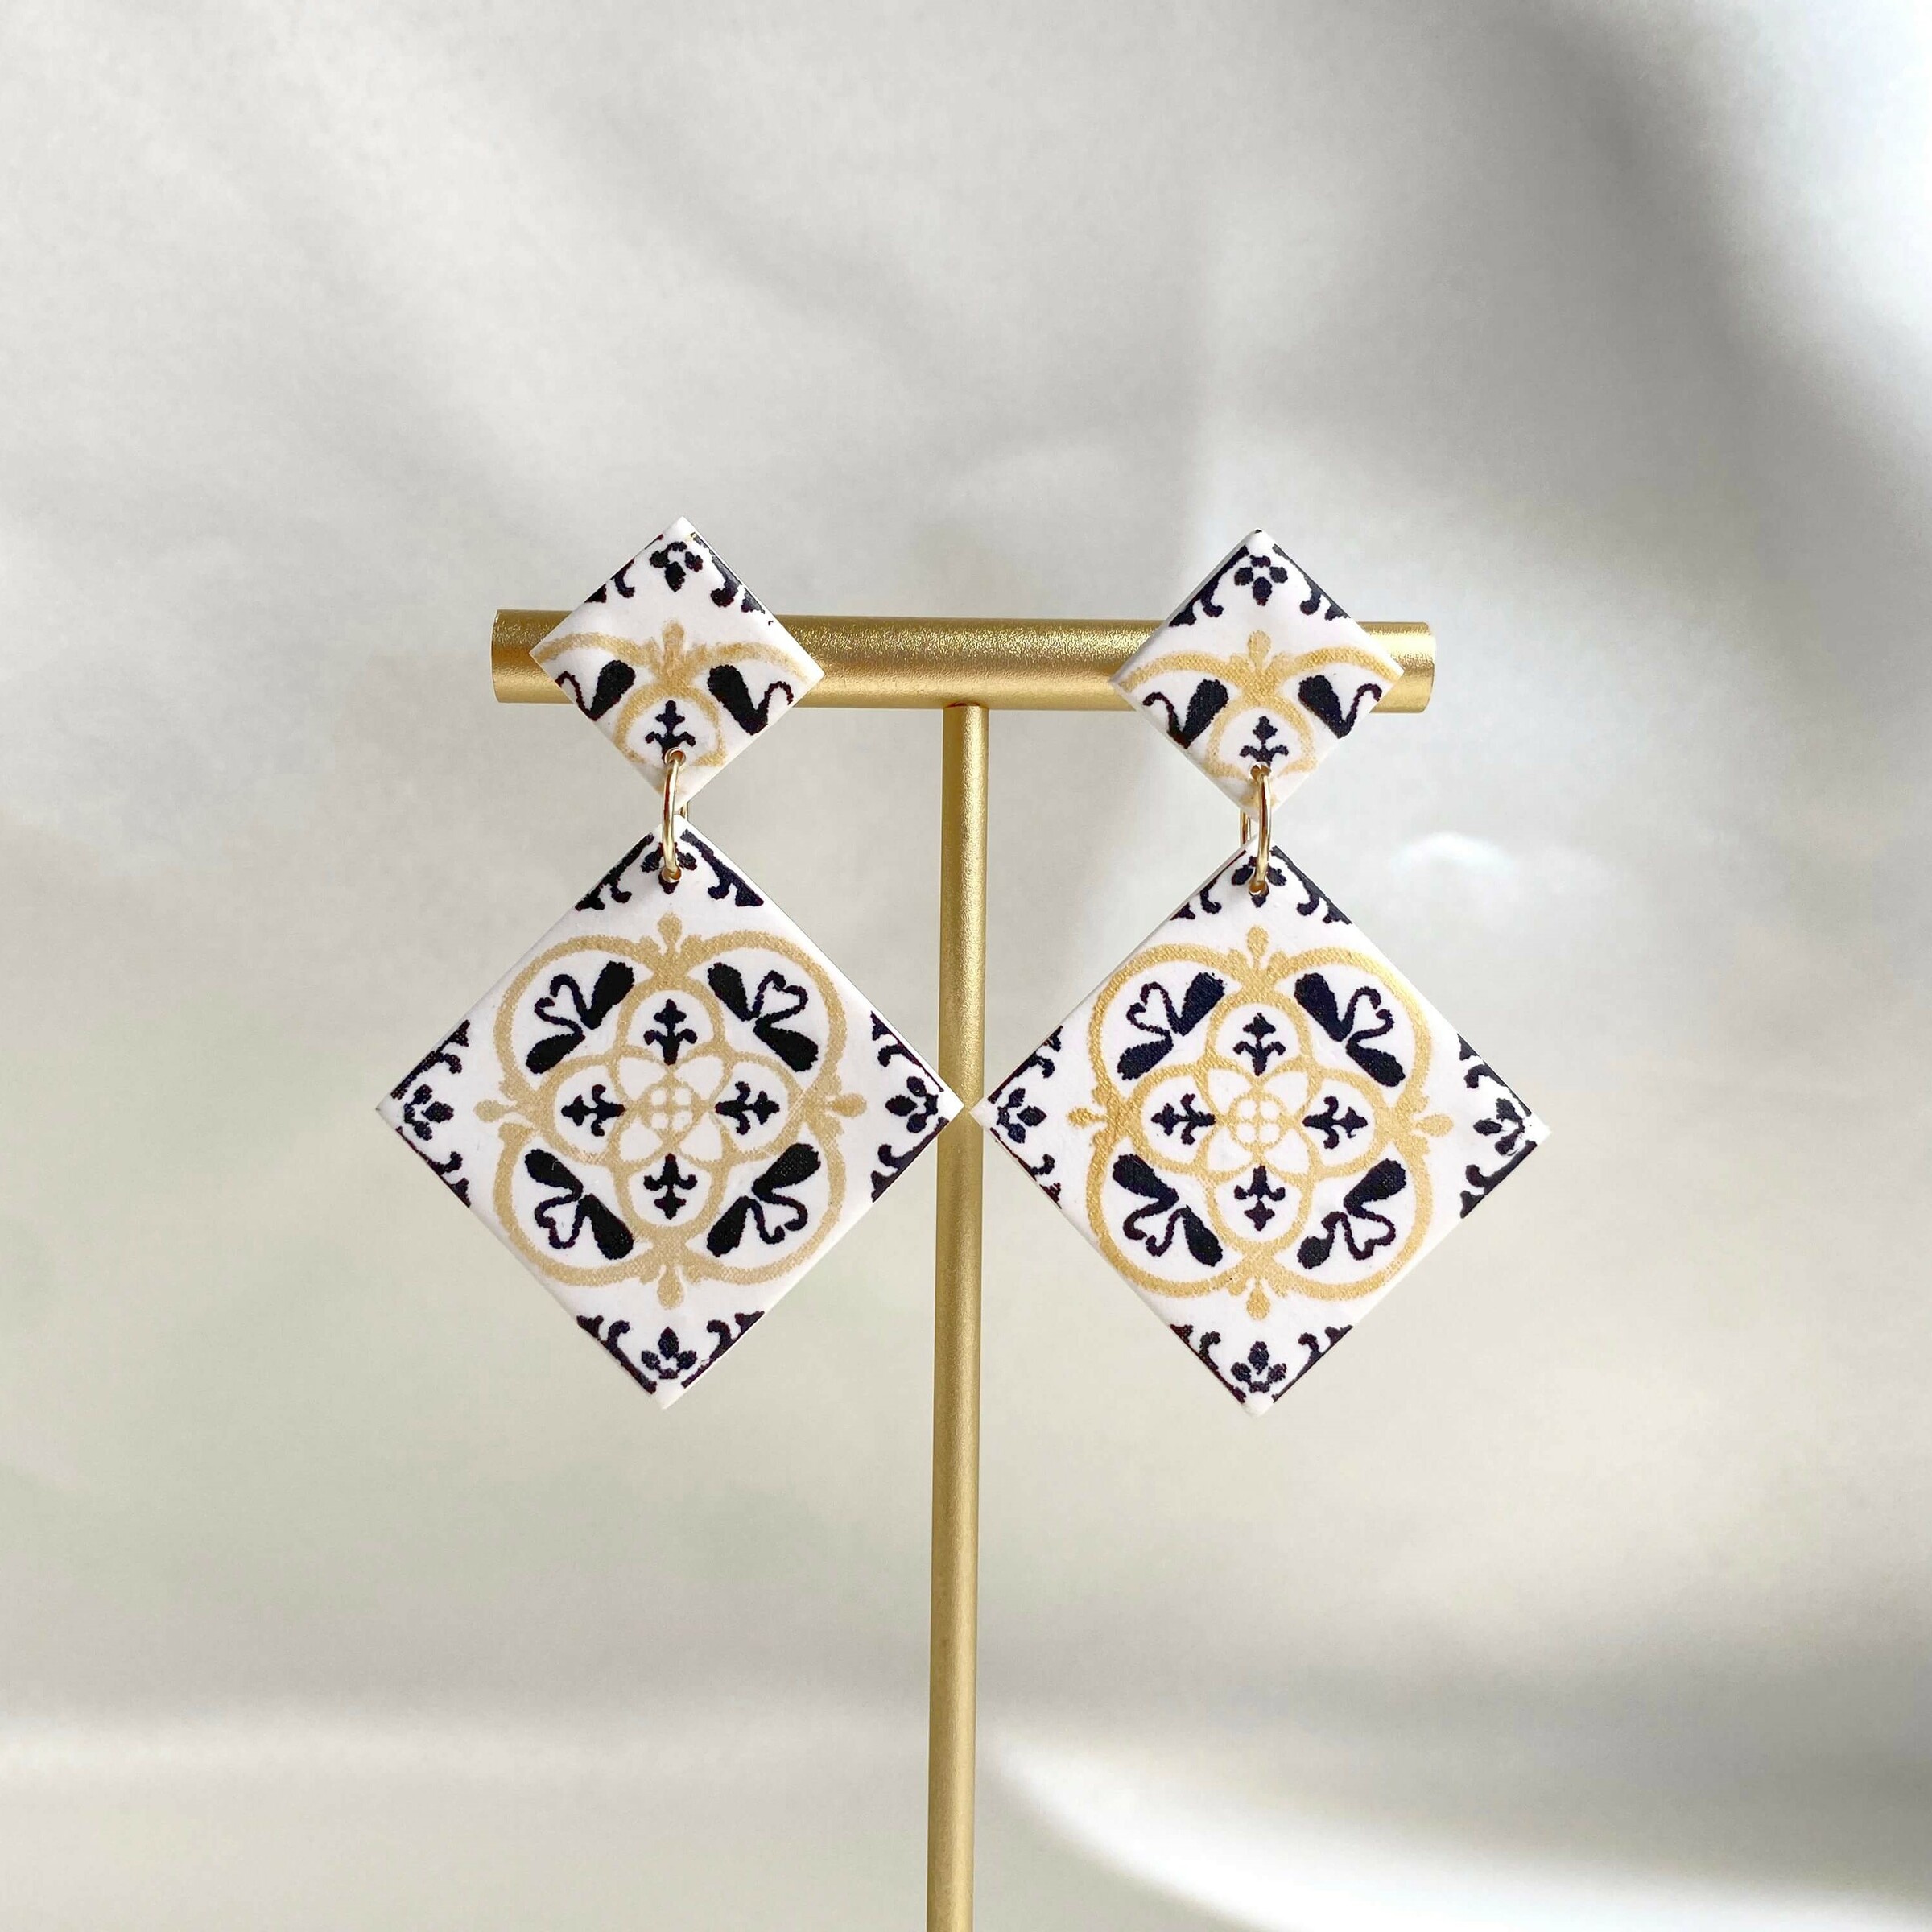 065-2 The Great Gatsby Tiles With Clay Studs Statement Earrings B.jpg